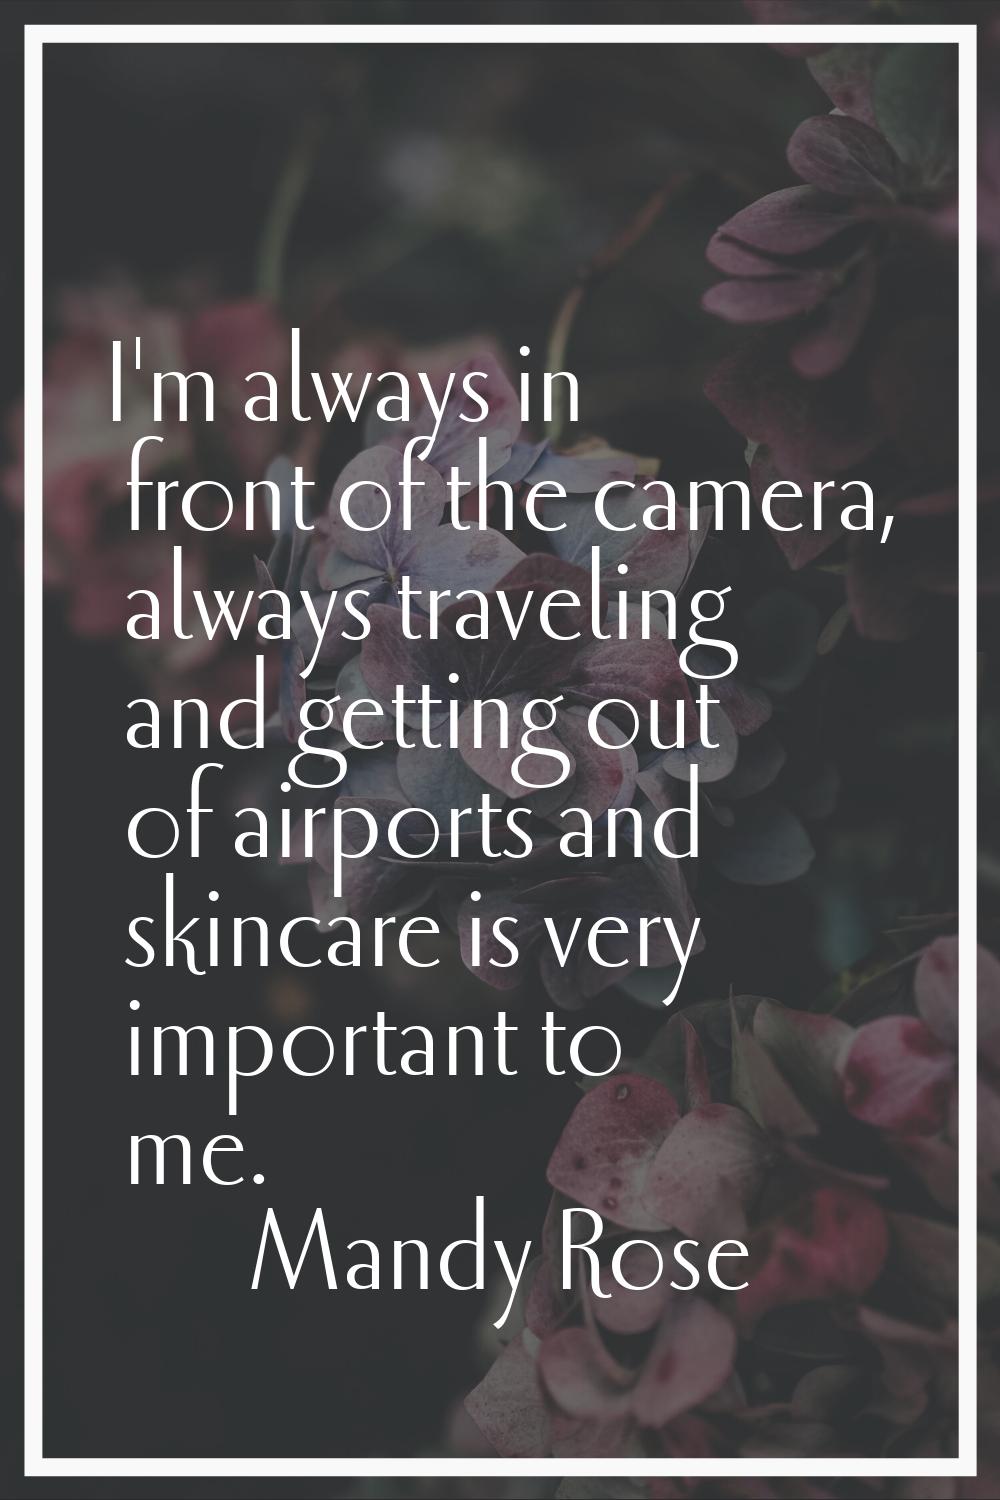 I'm always in front of the camera, always traveling and getting out of airports and skincare is ver